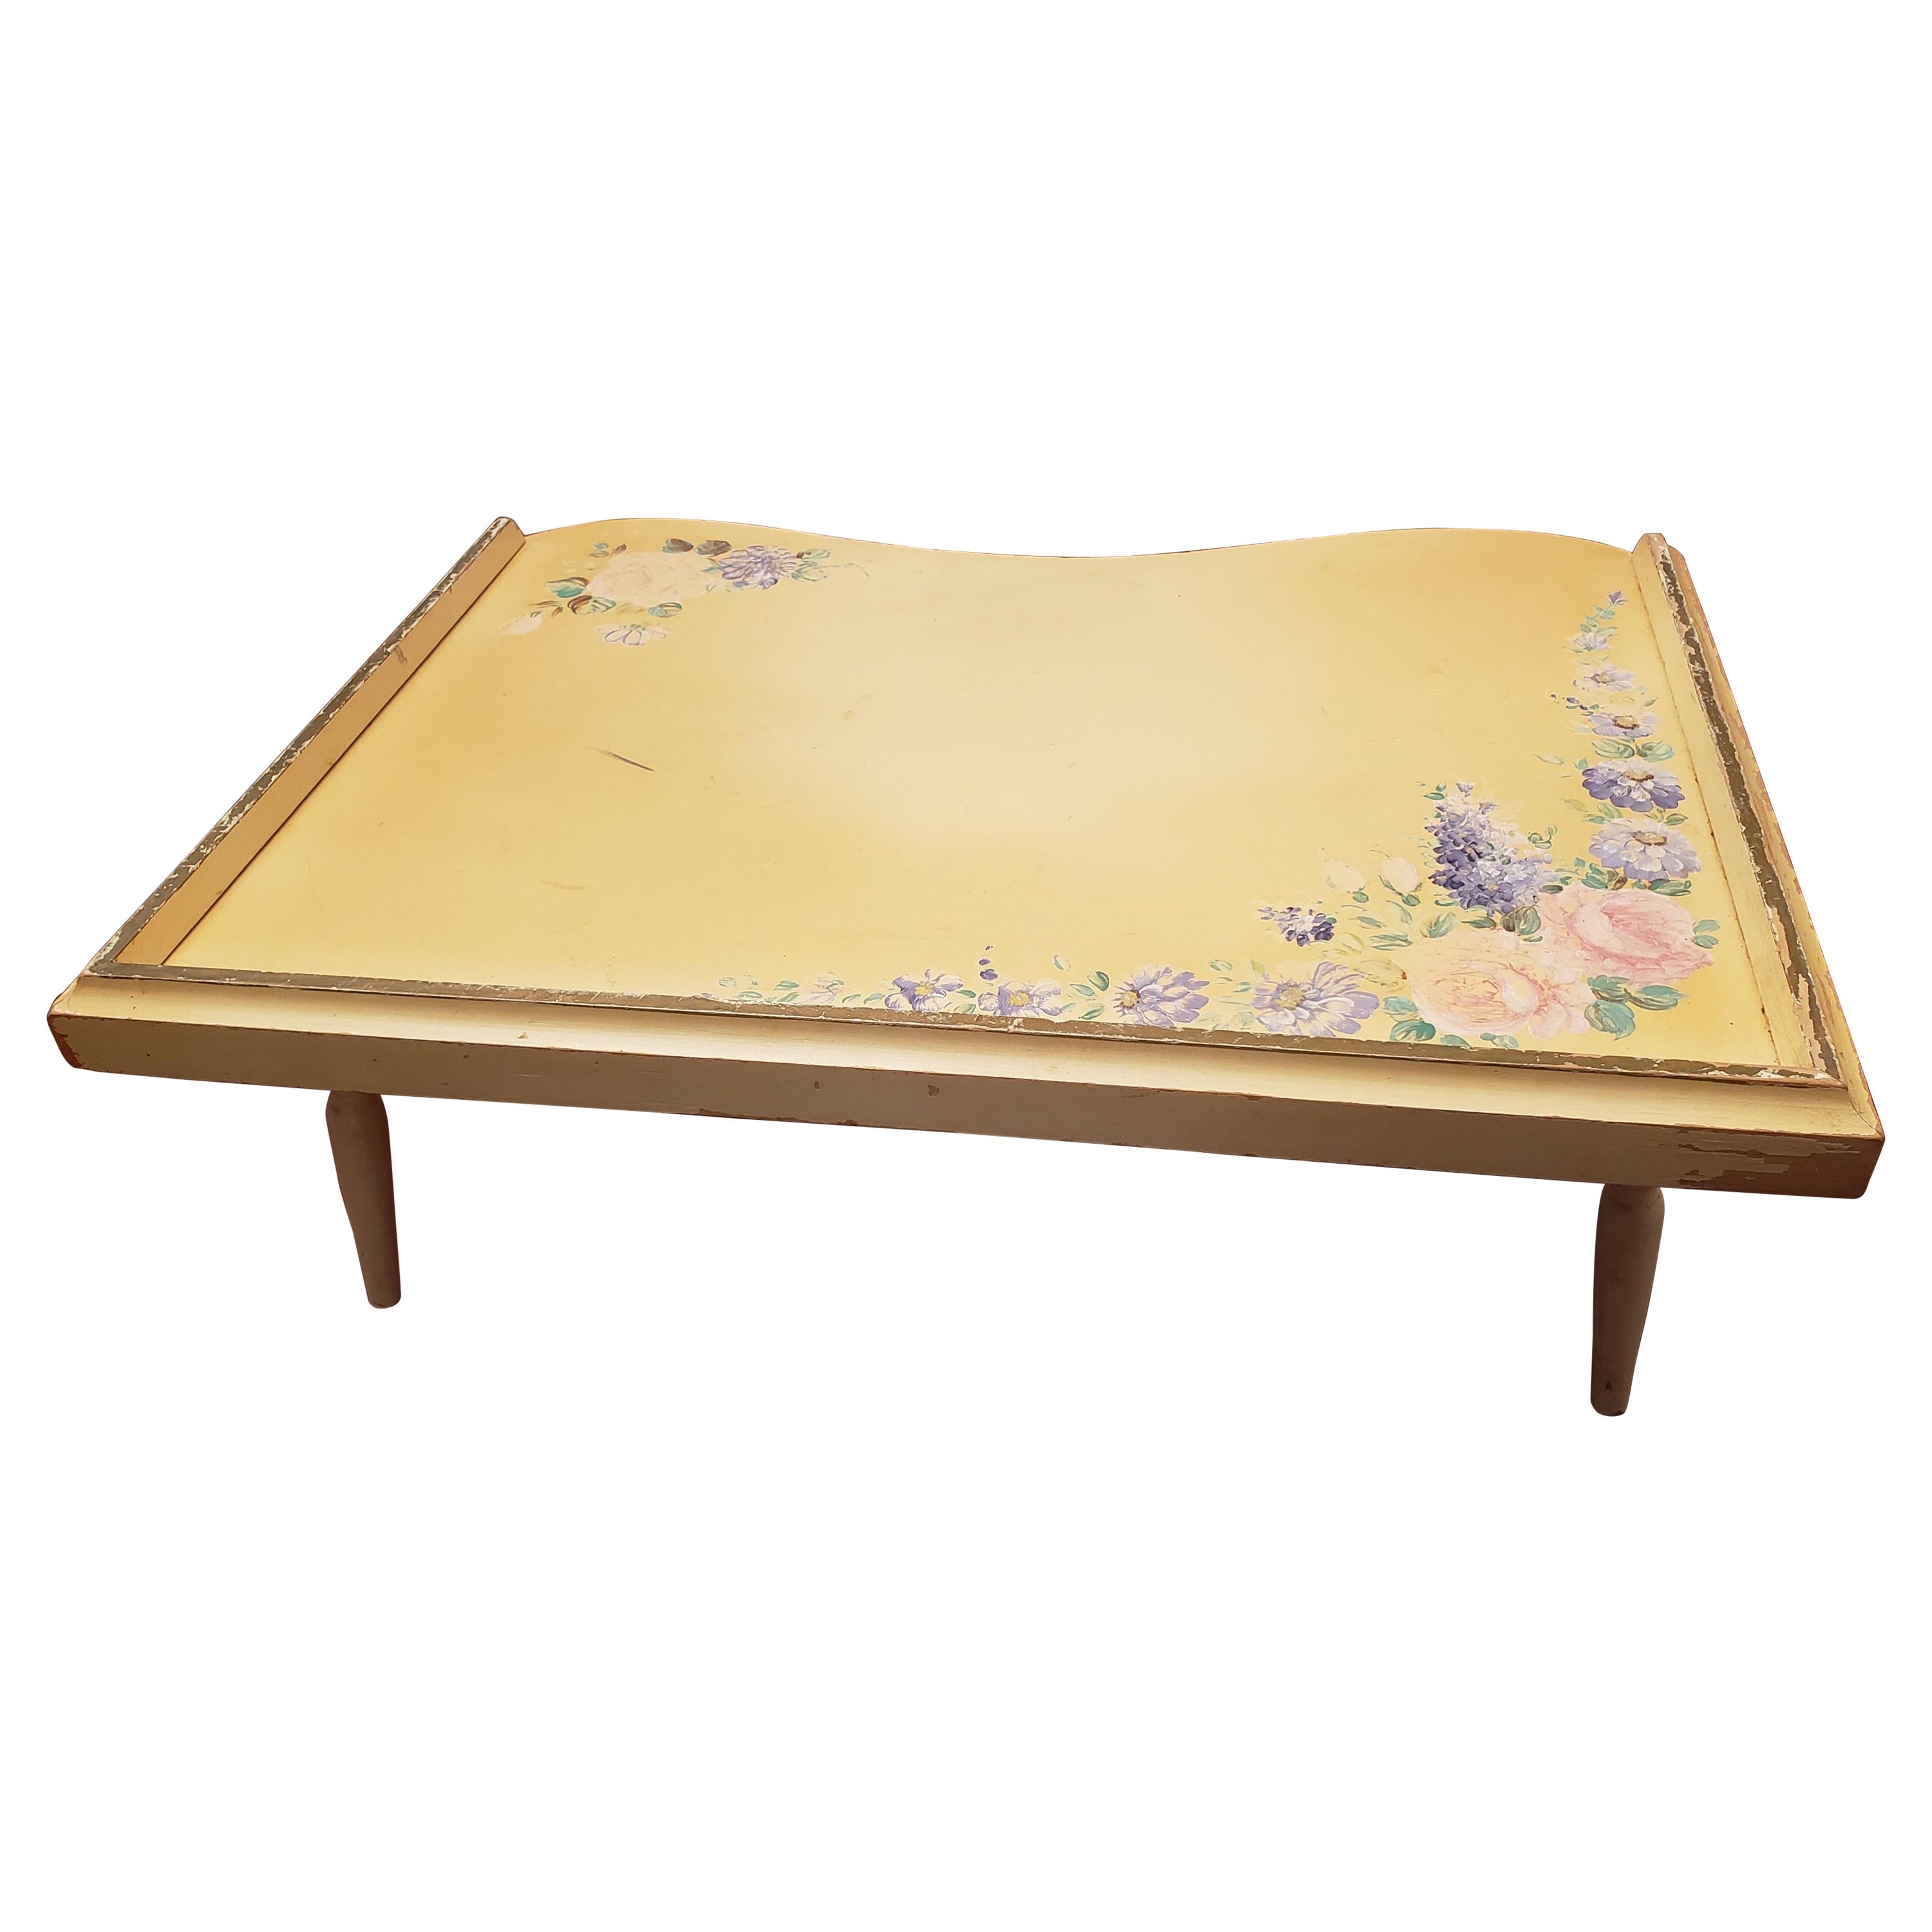 1961 Hand Painted Custom Victorian Foldable Bed Tray Lap Tray For Sale